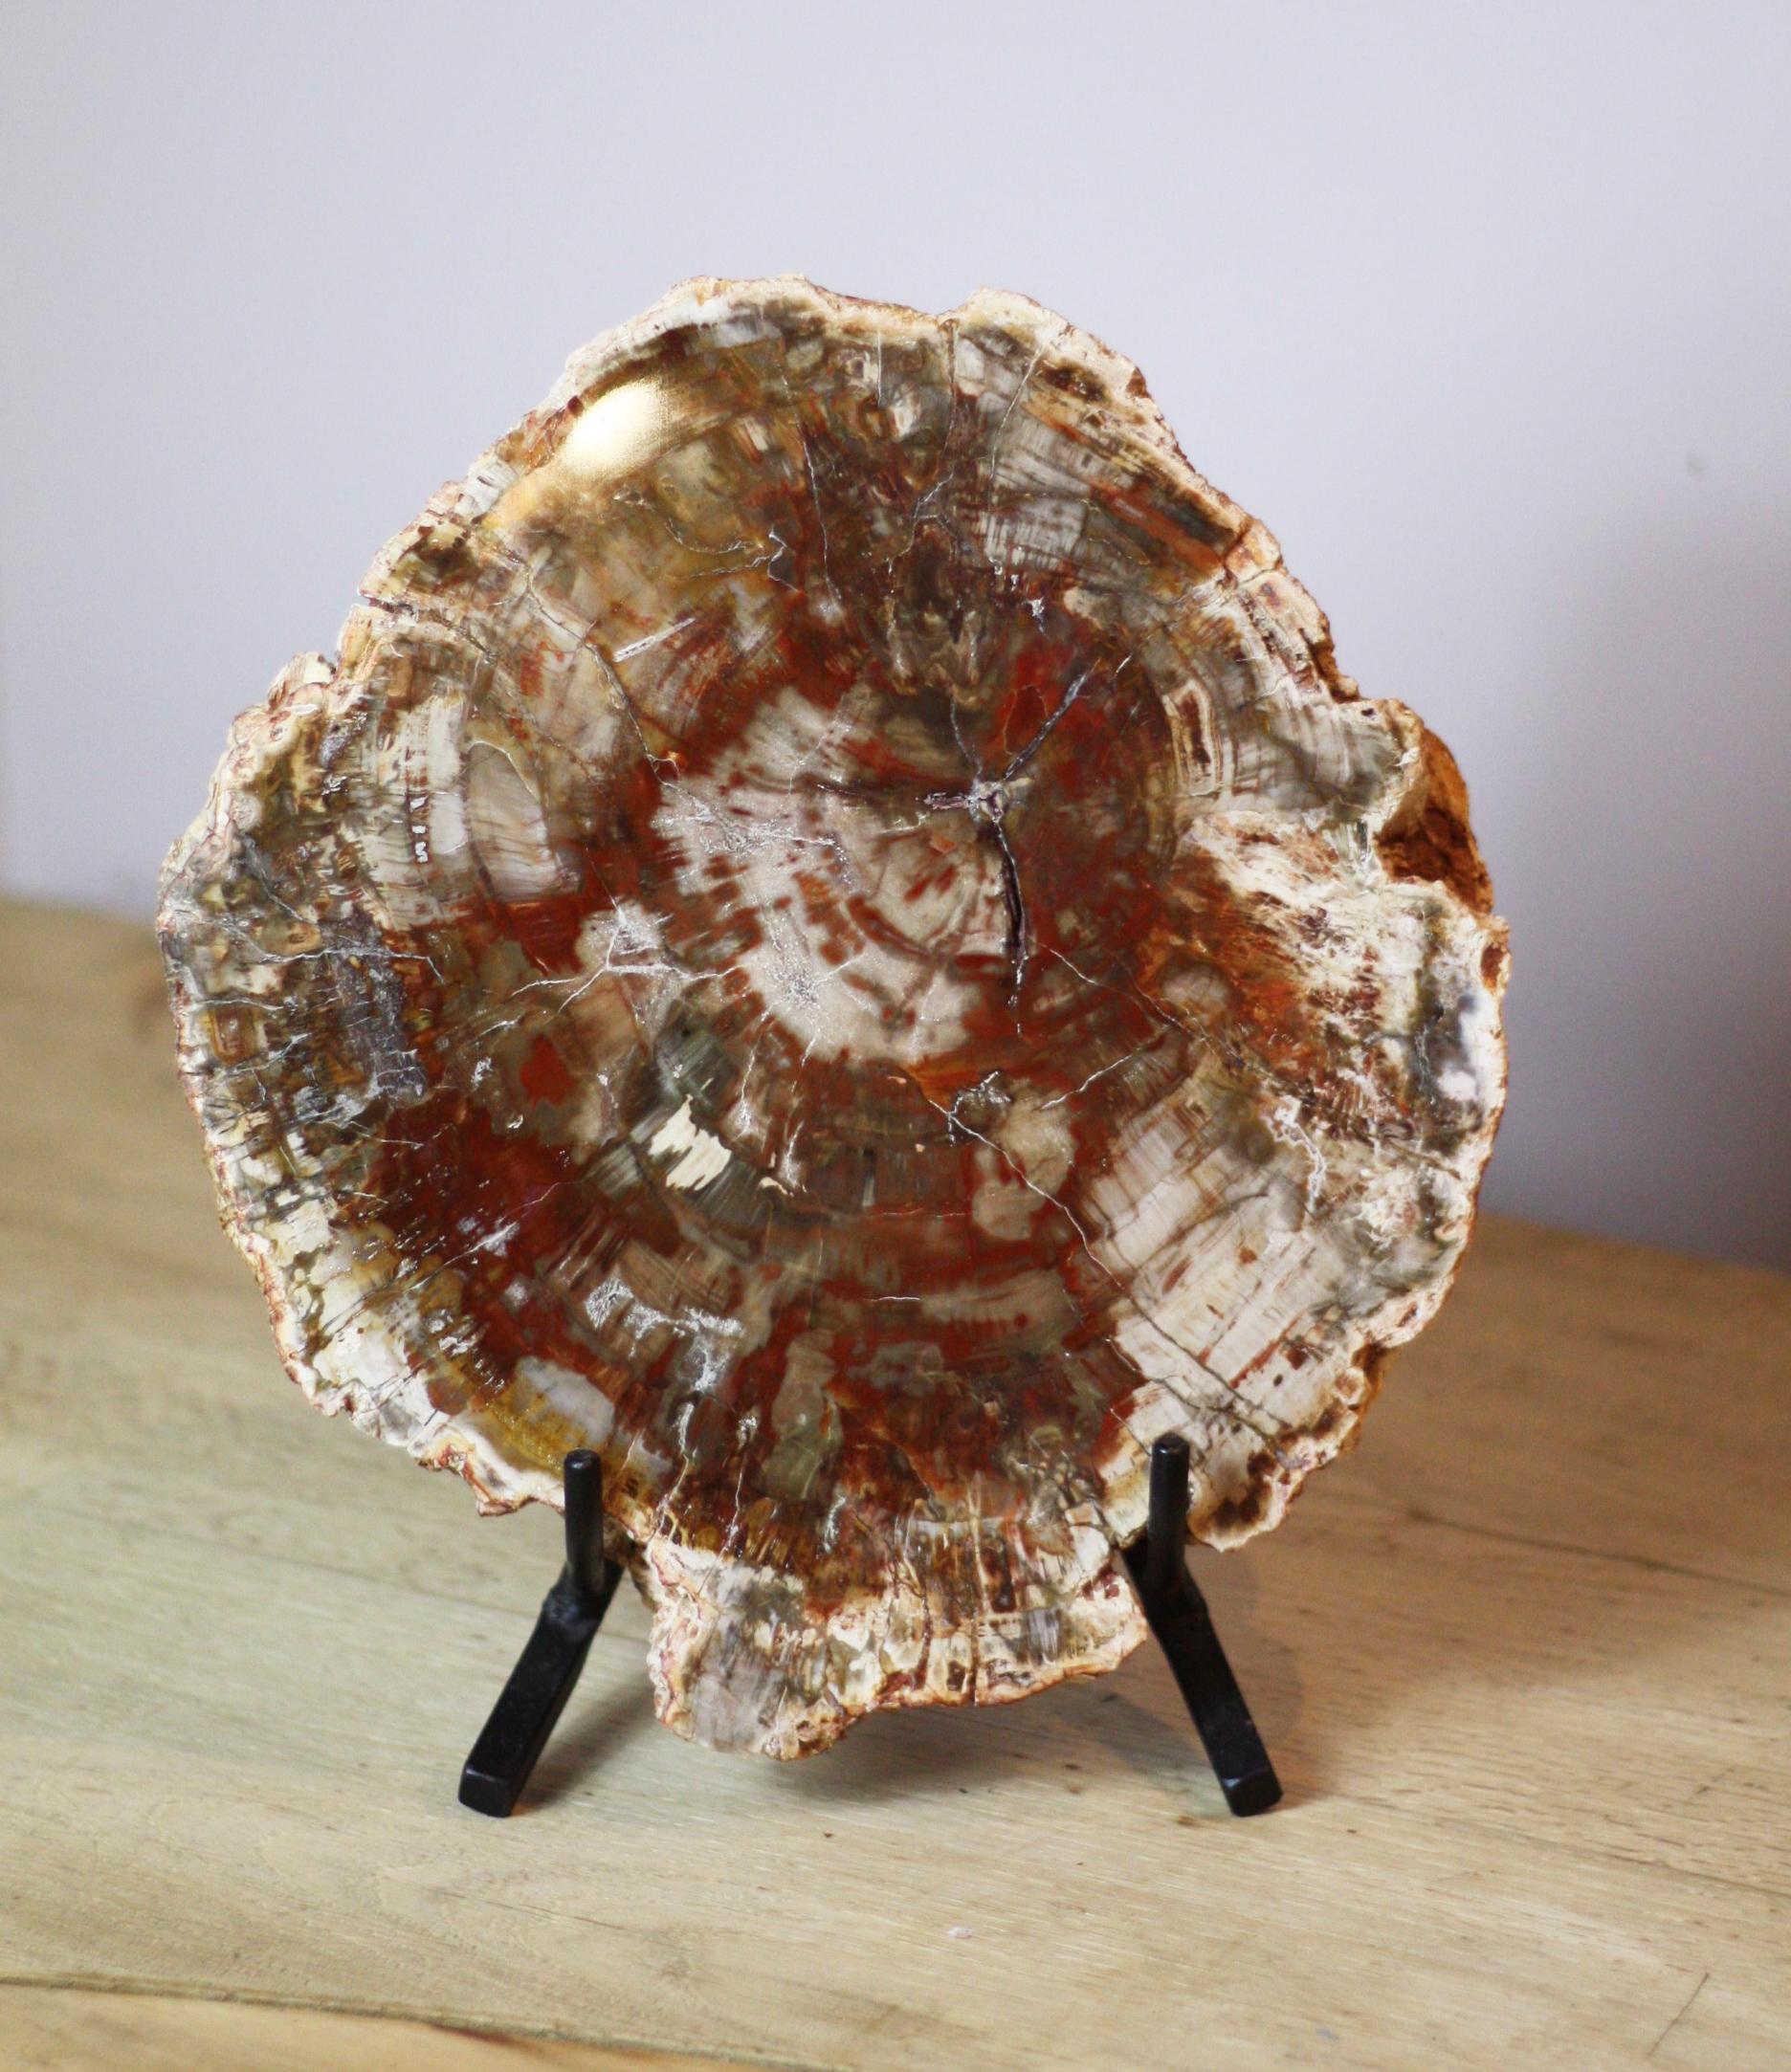 Impressive piece of petrified wood brightly colored, naturally formed patterns accentuated by the cut and highly polished surface on decorative iron stand.